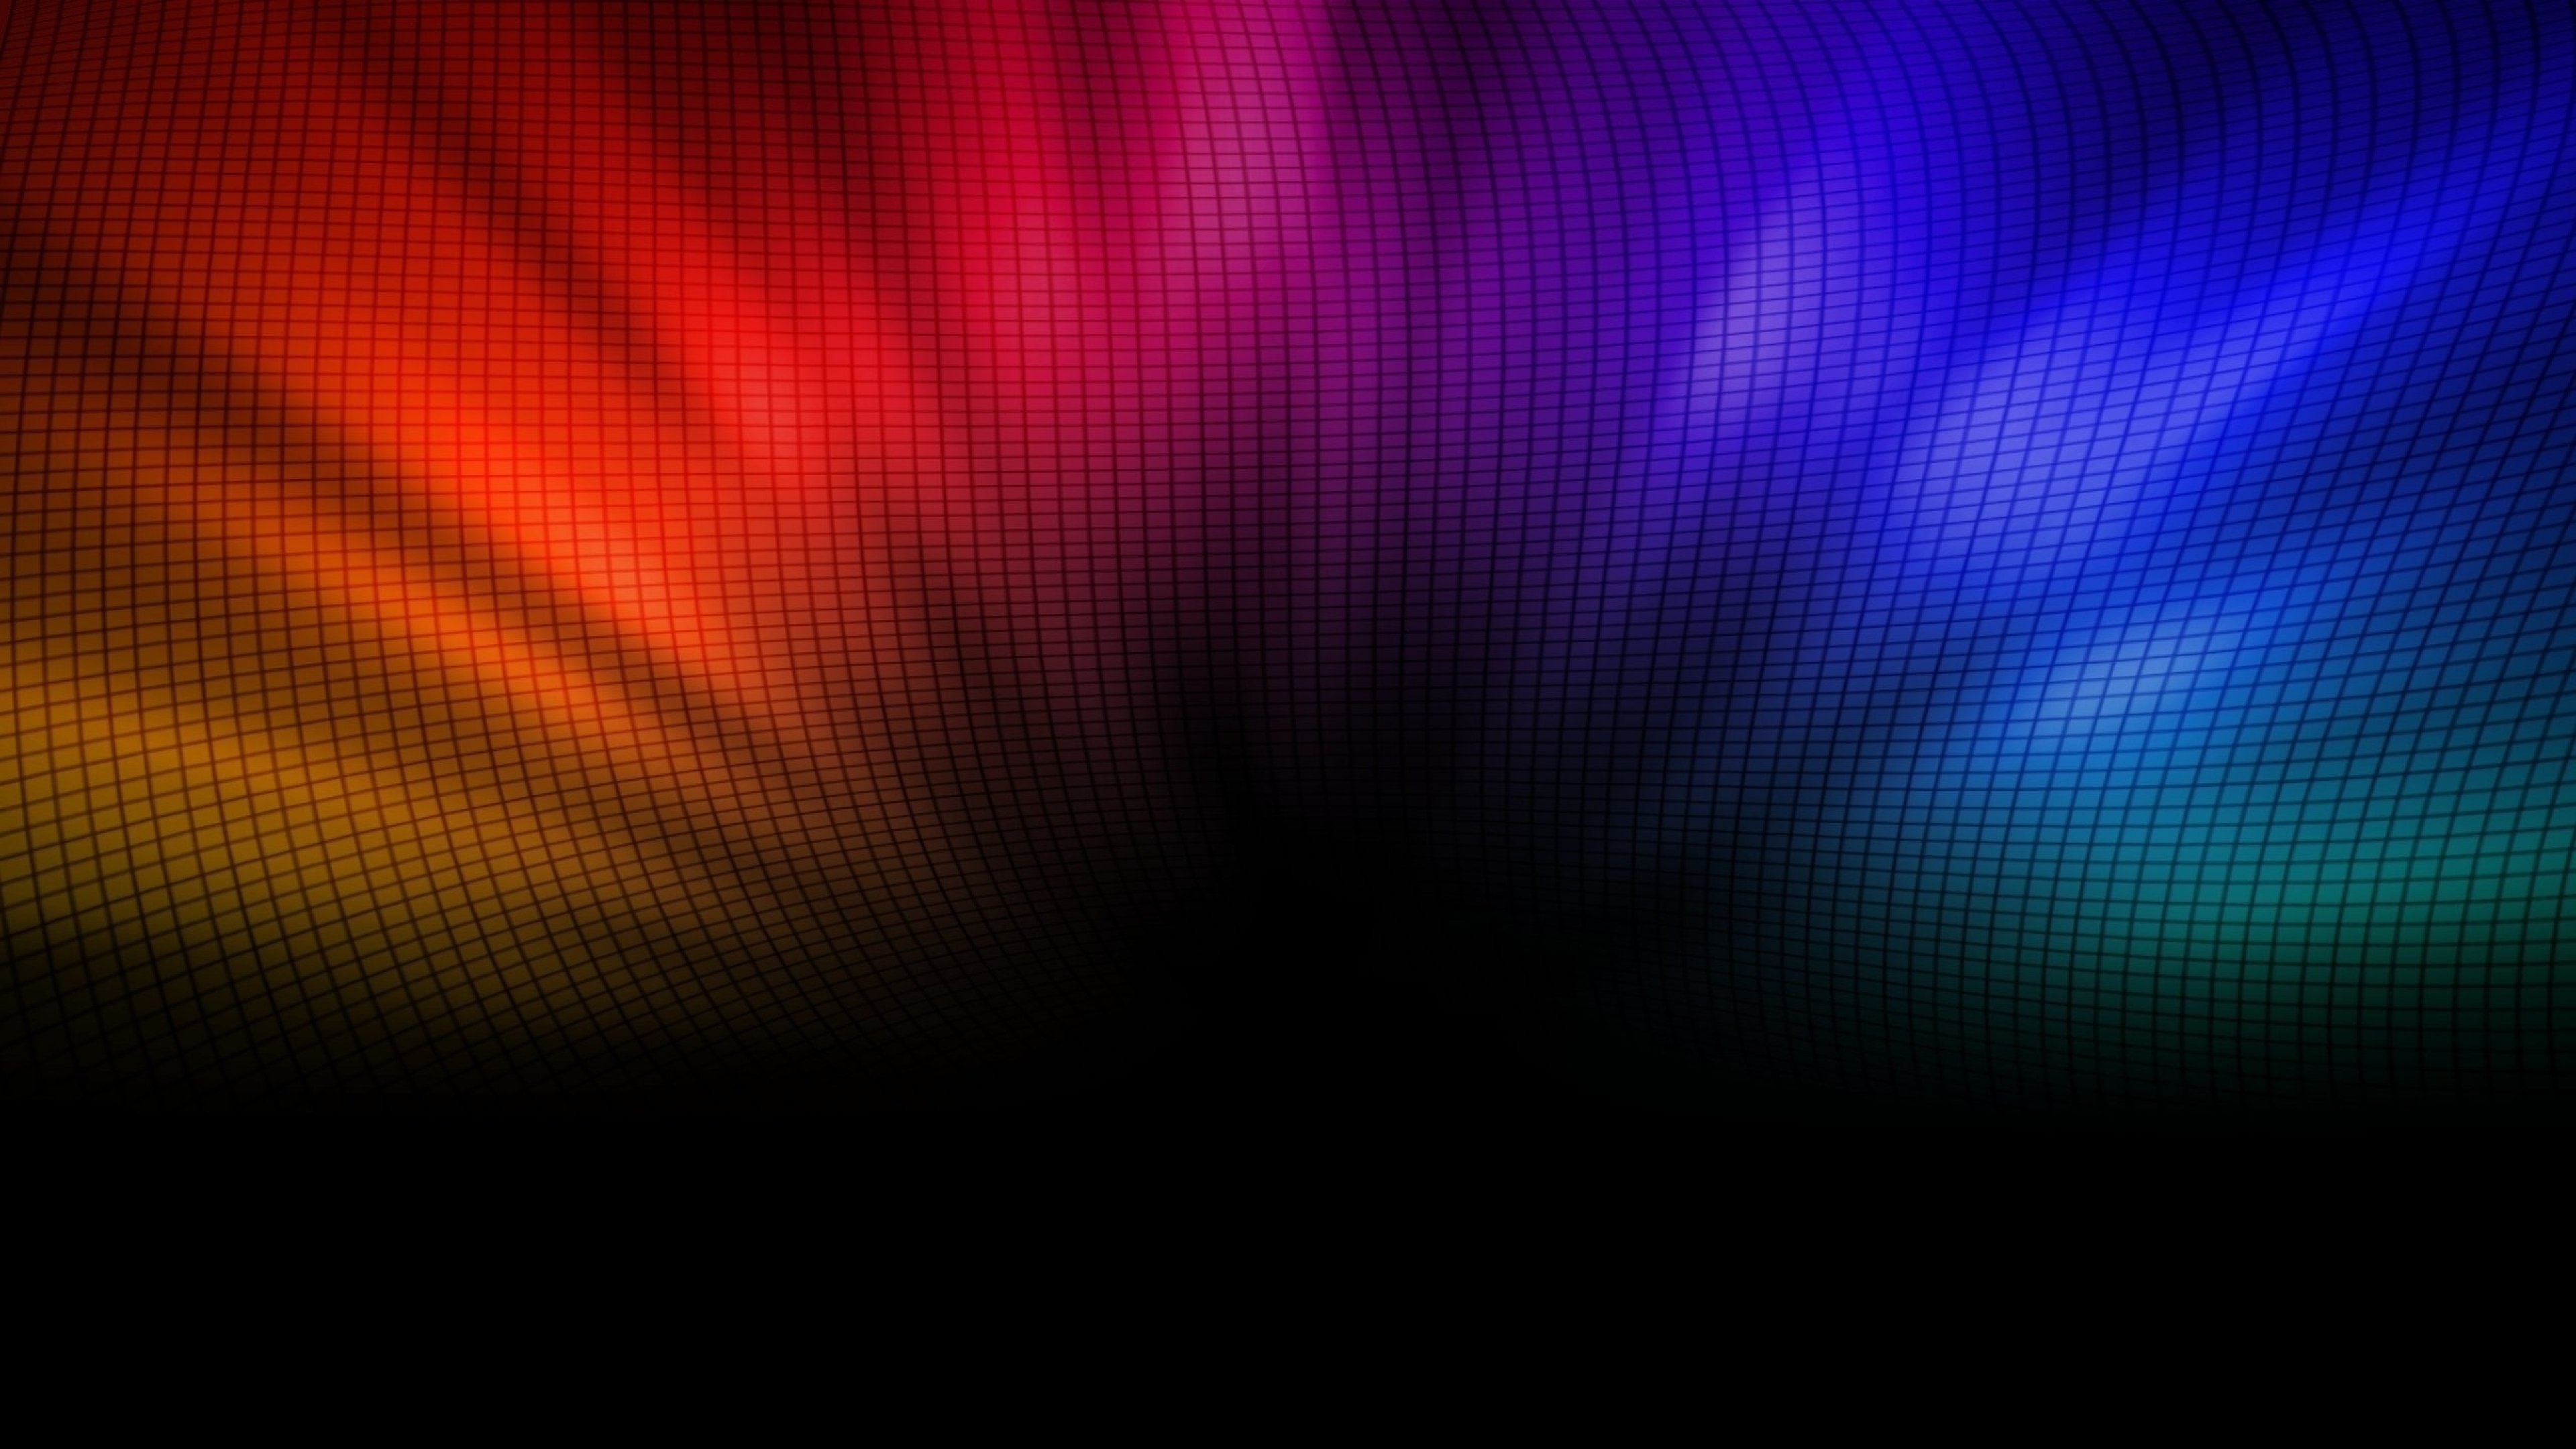 Amazing Colorful Backgrounds HQ